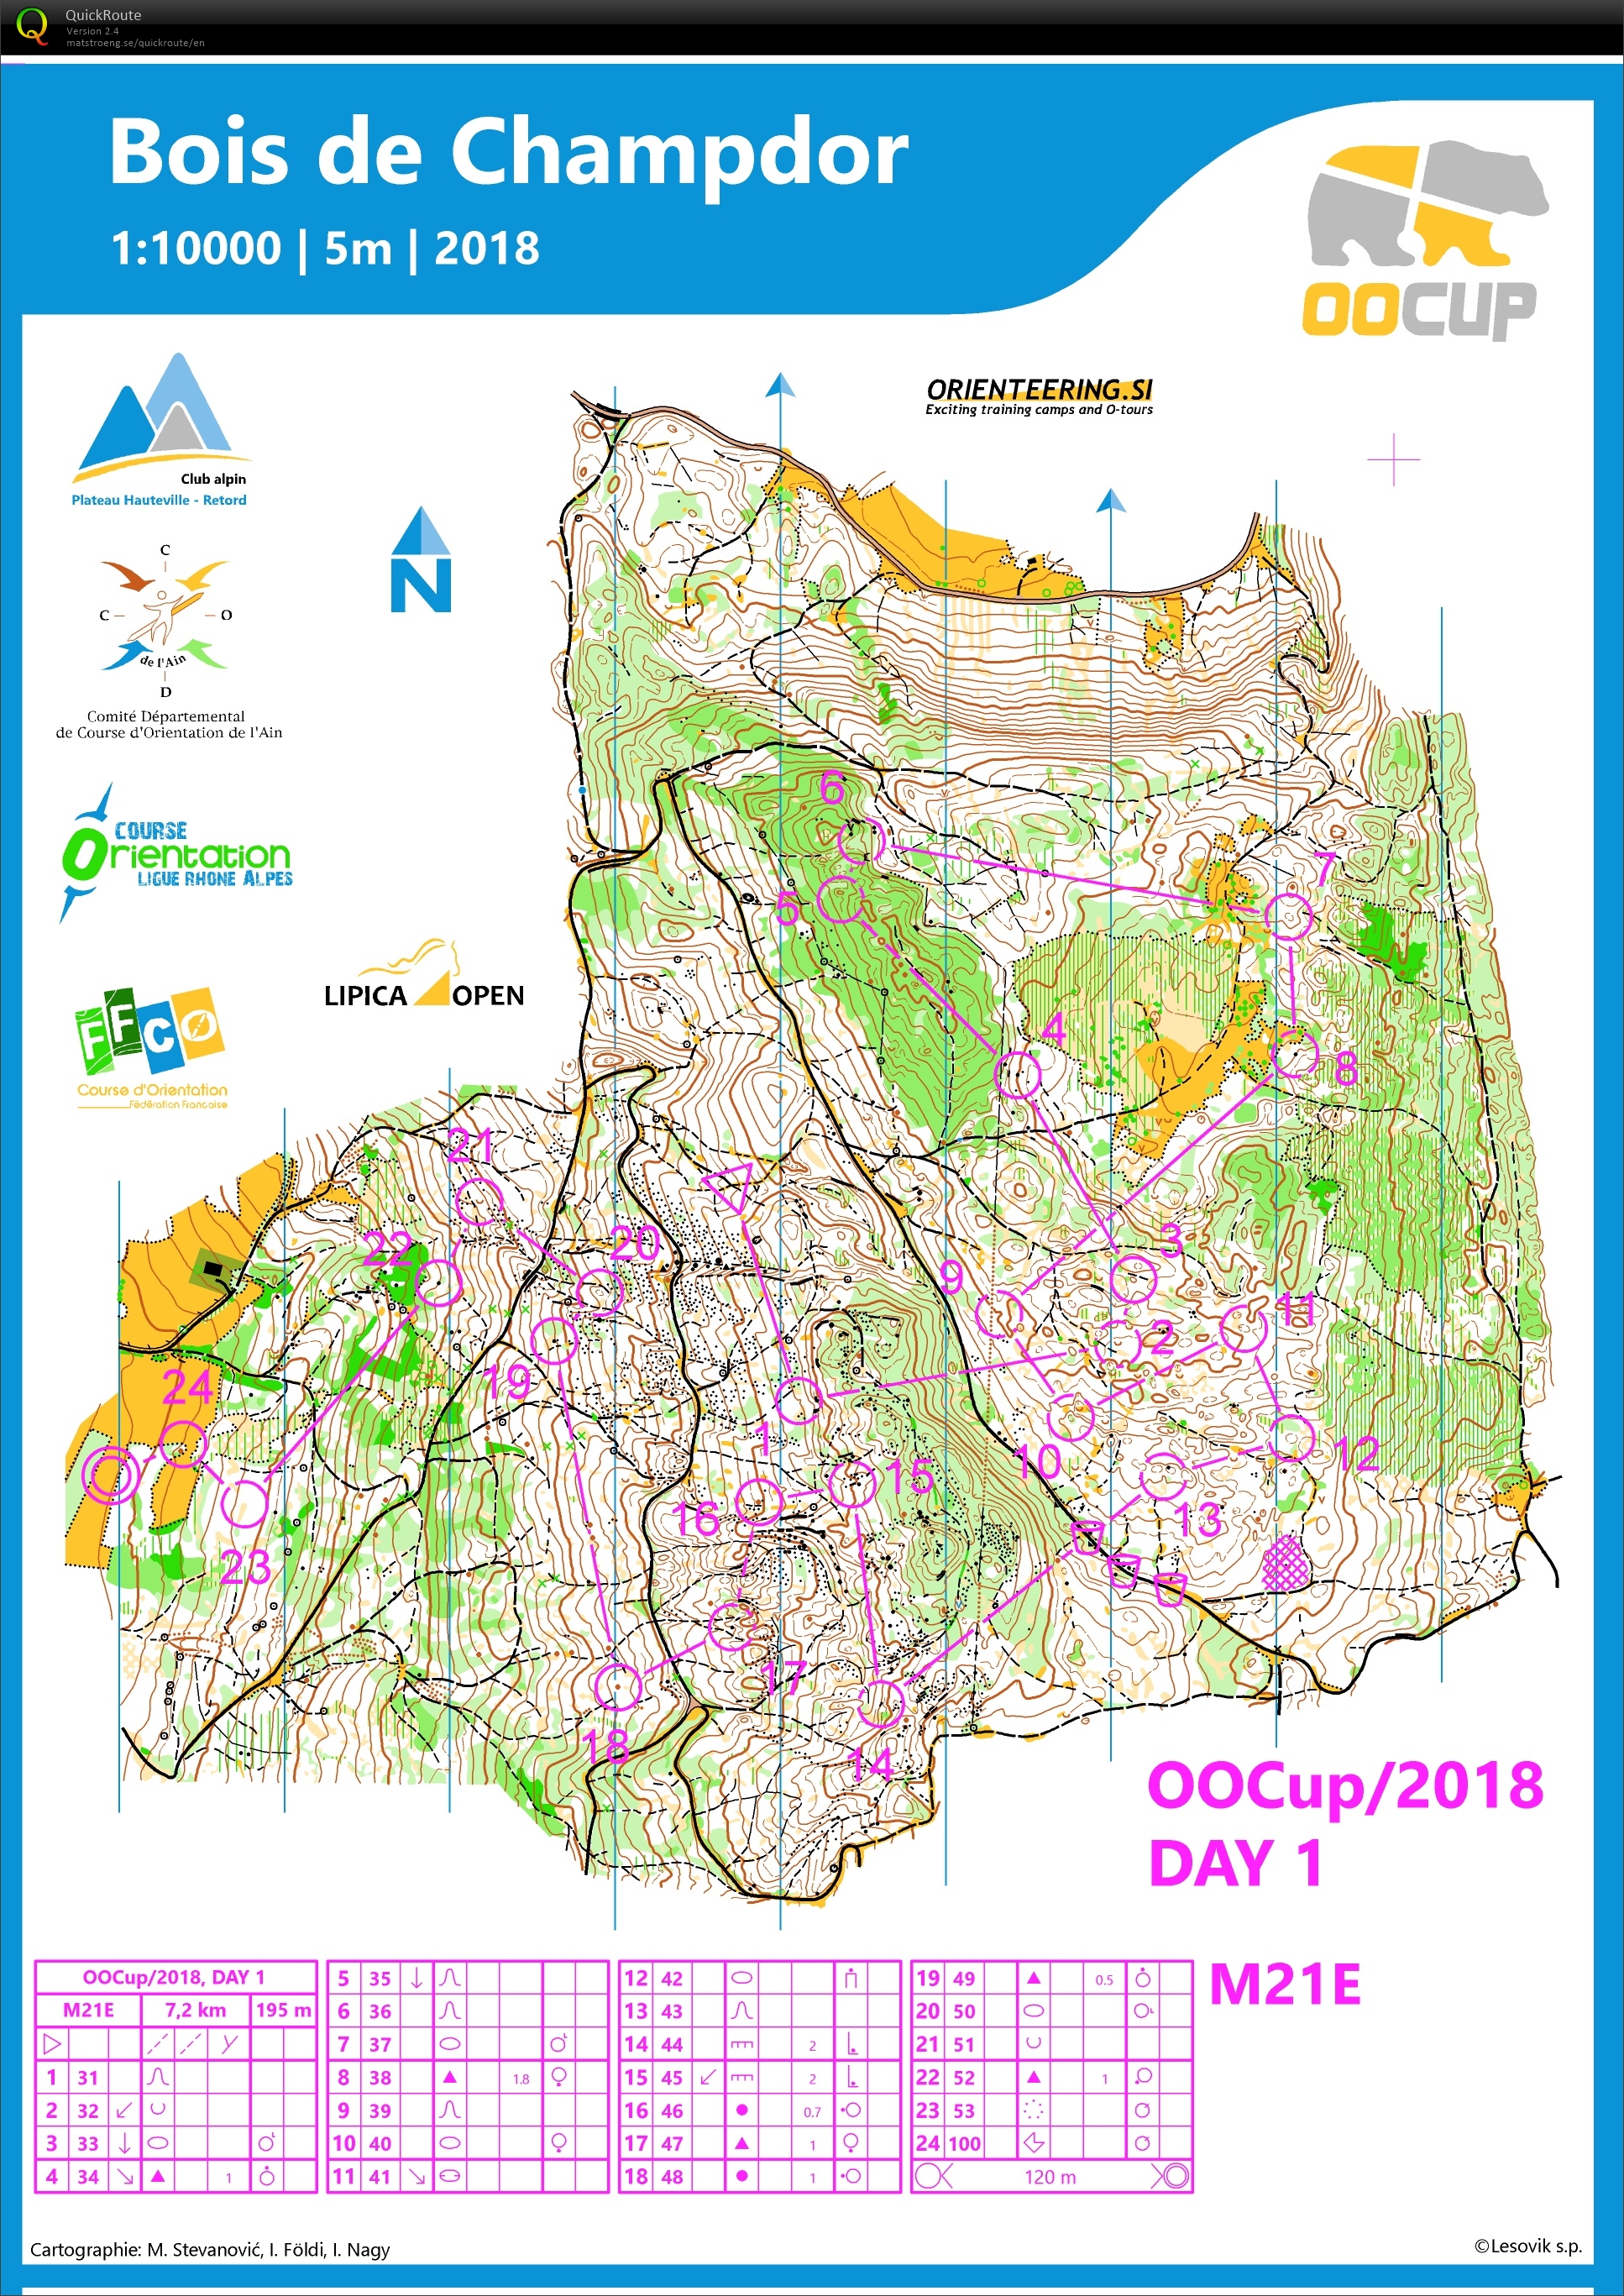 OOcup - day1 (25-07-2018)